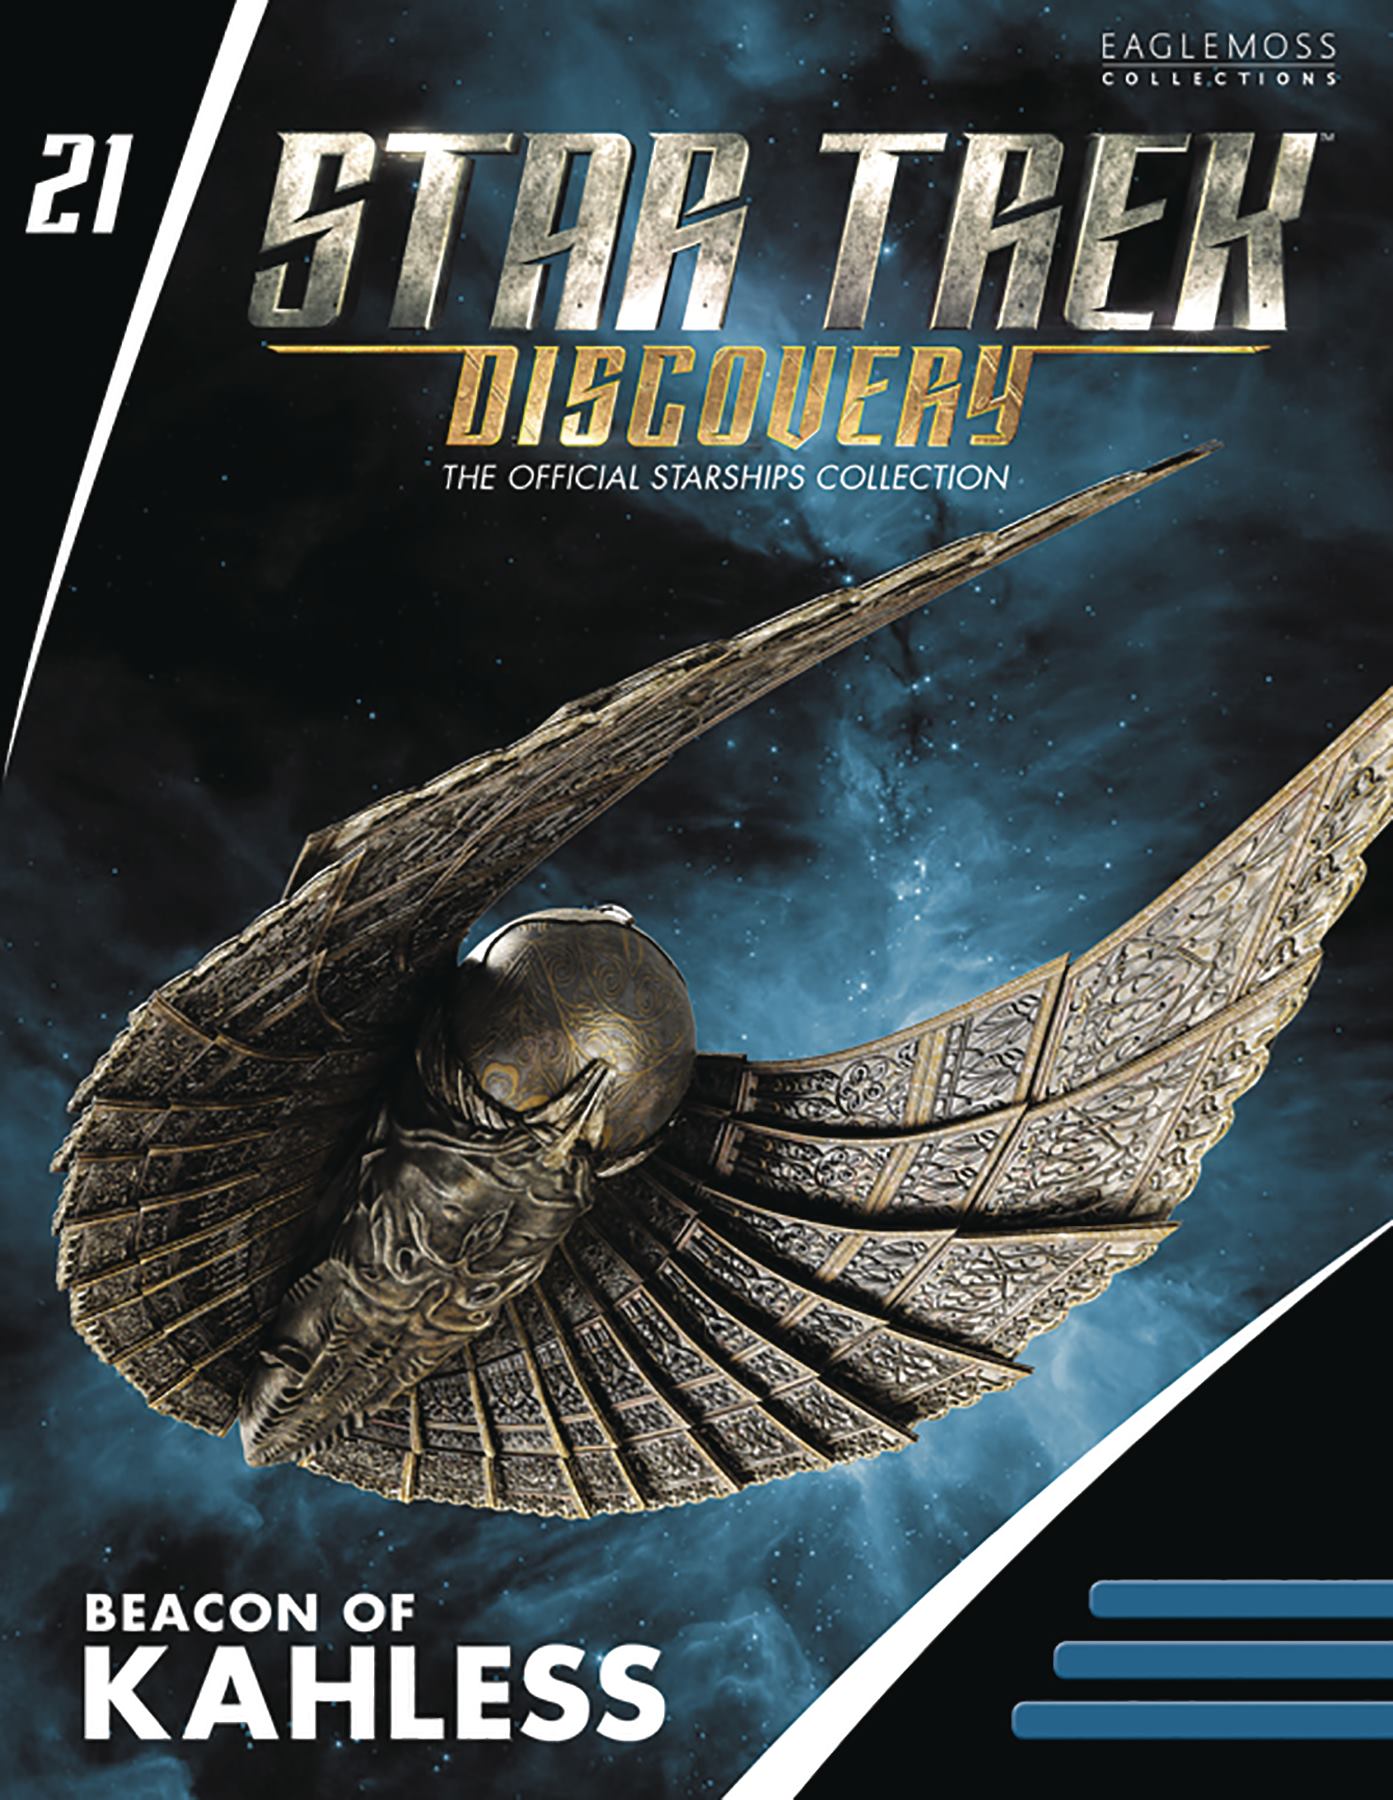 Star Trek: Discovery- The Official Starships Collection #21.jpg